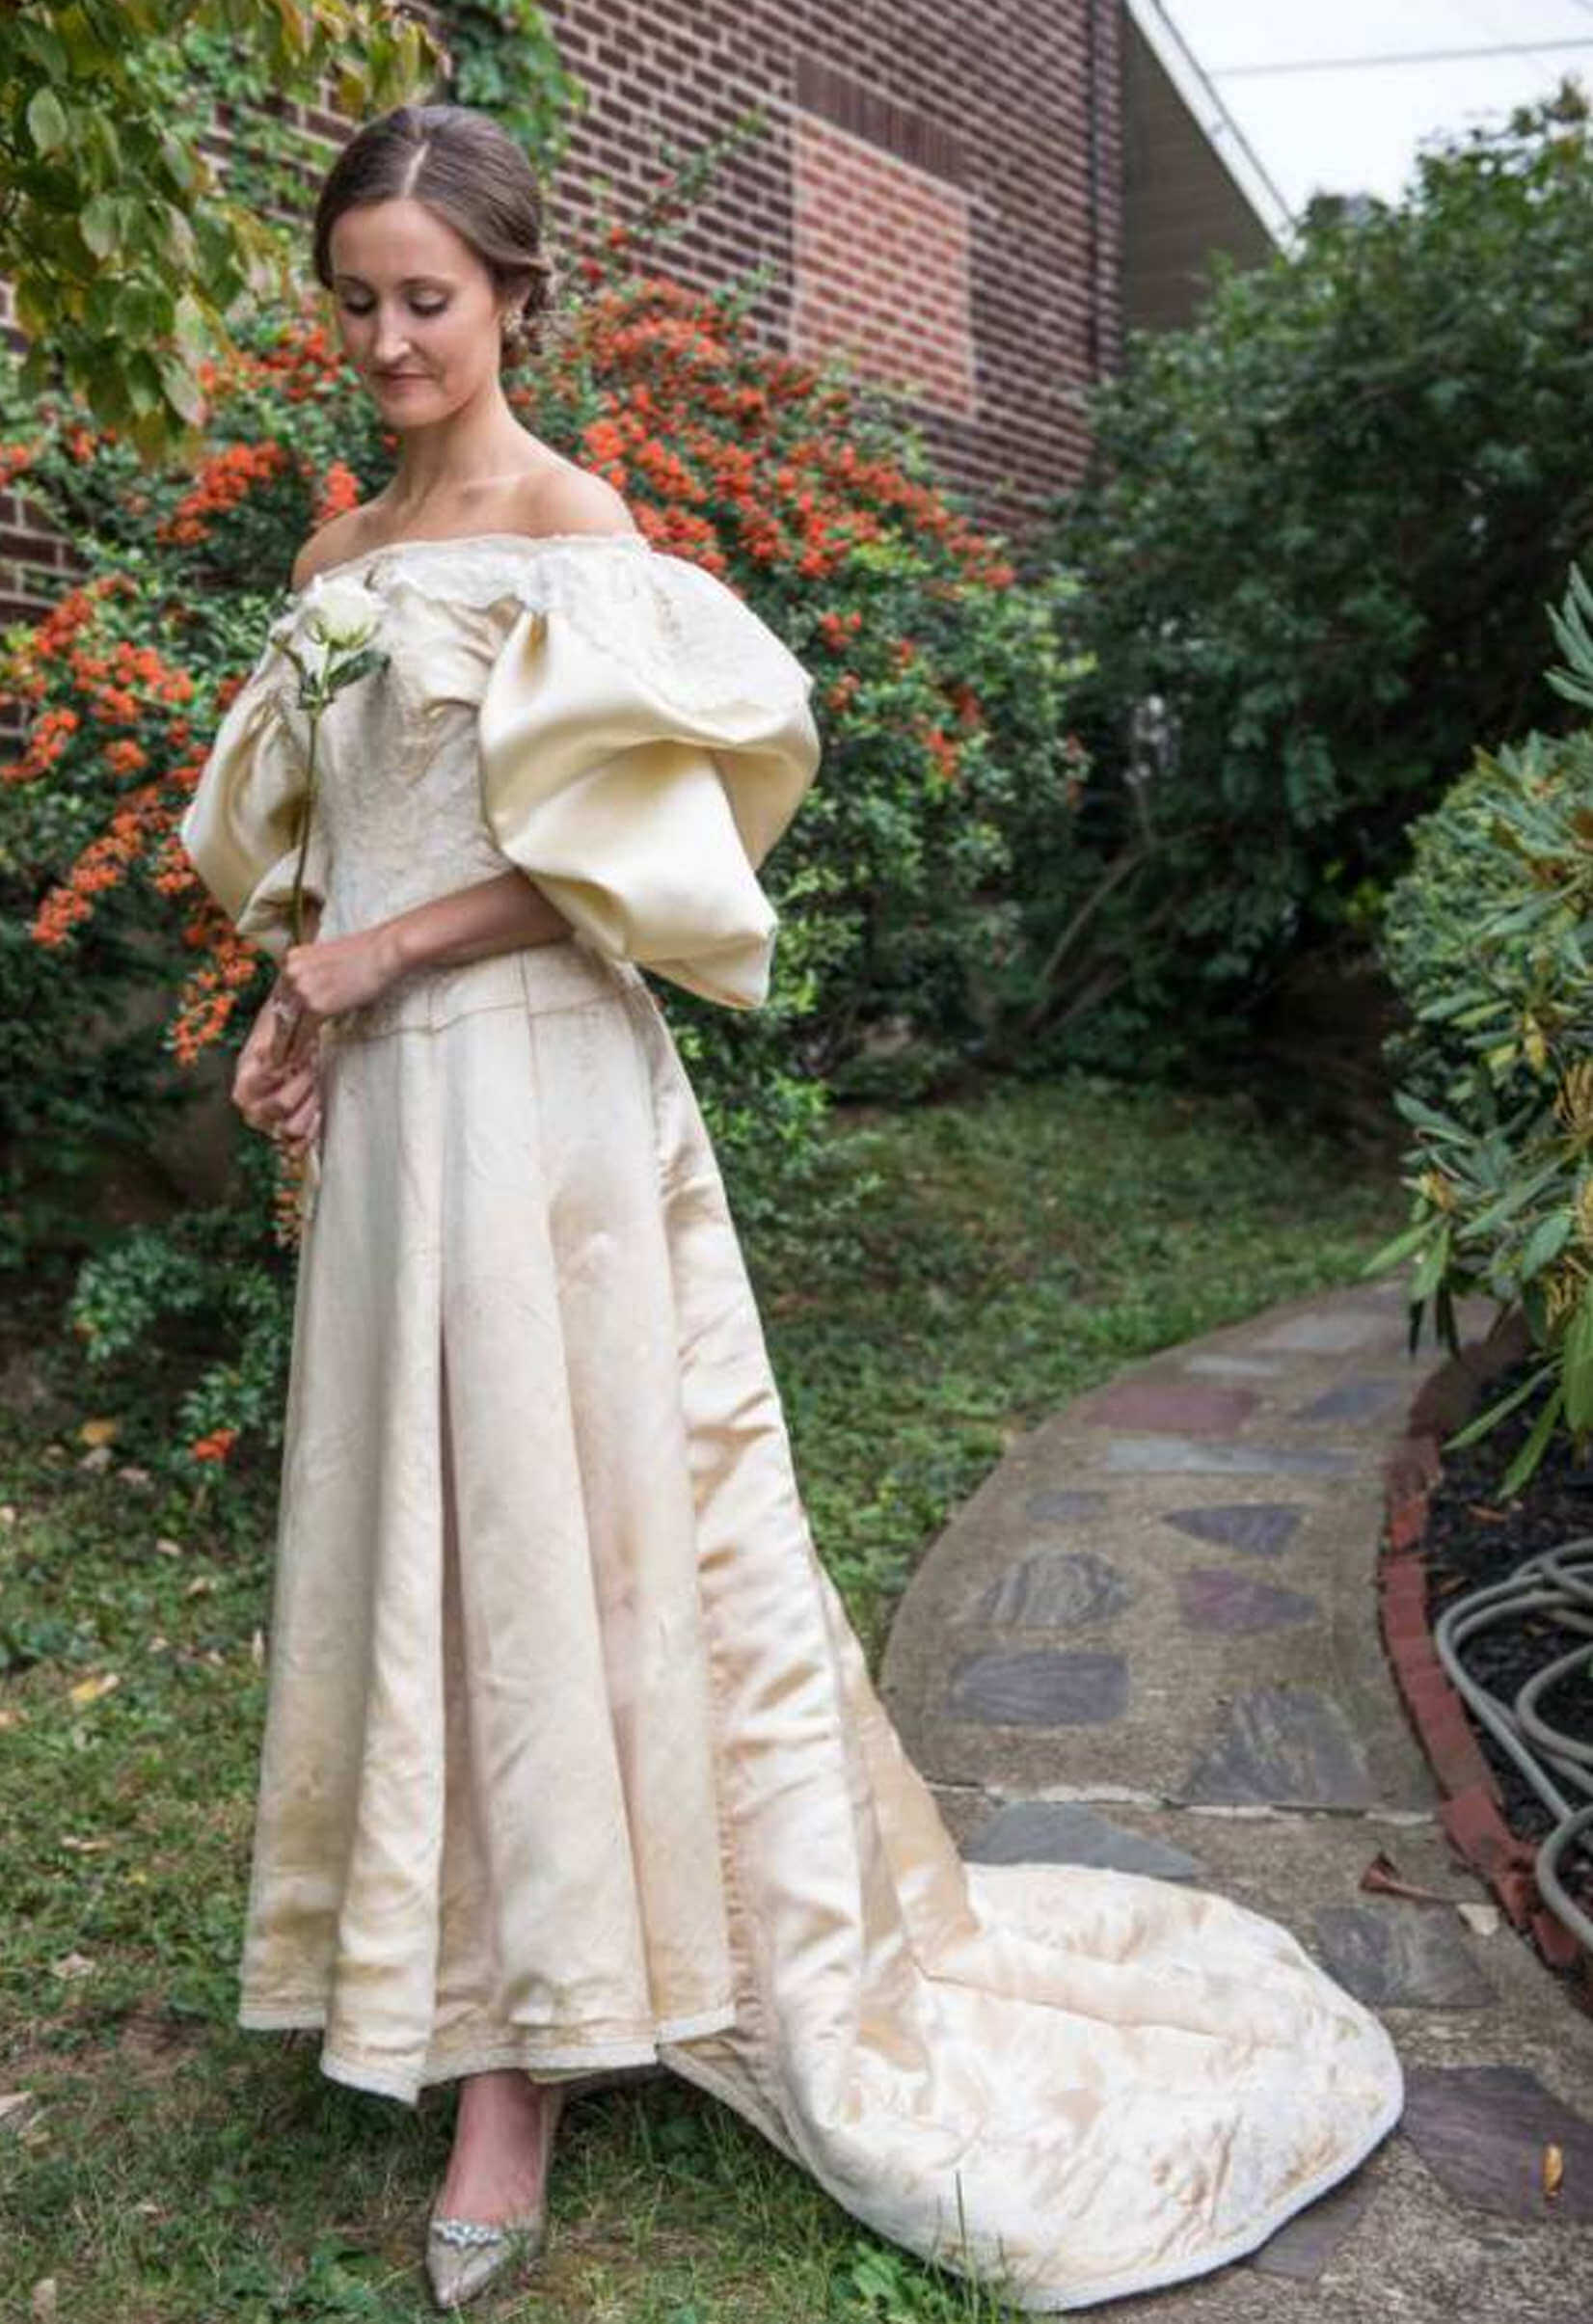 Abigail strikes a pose in her restored second hand wedding dress